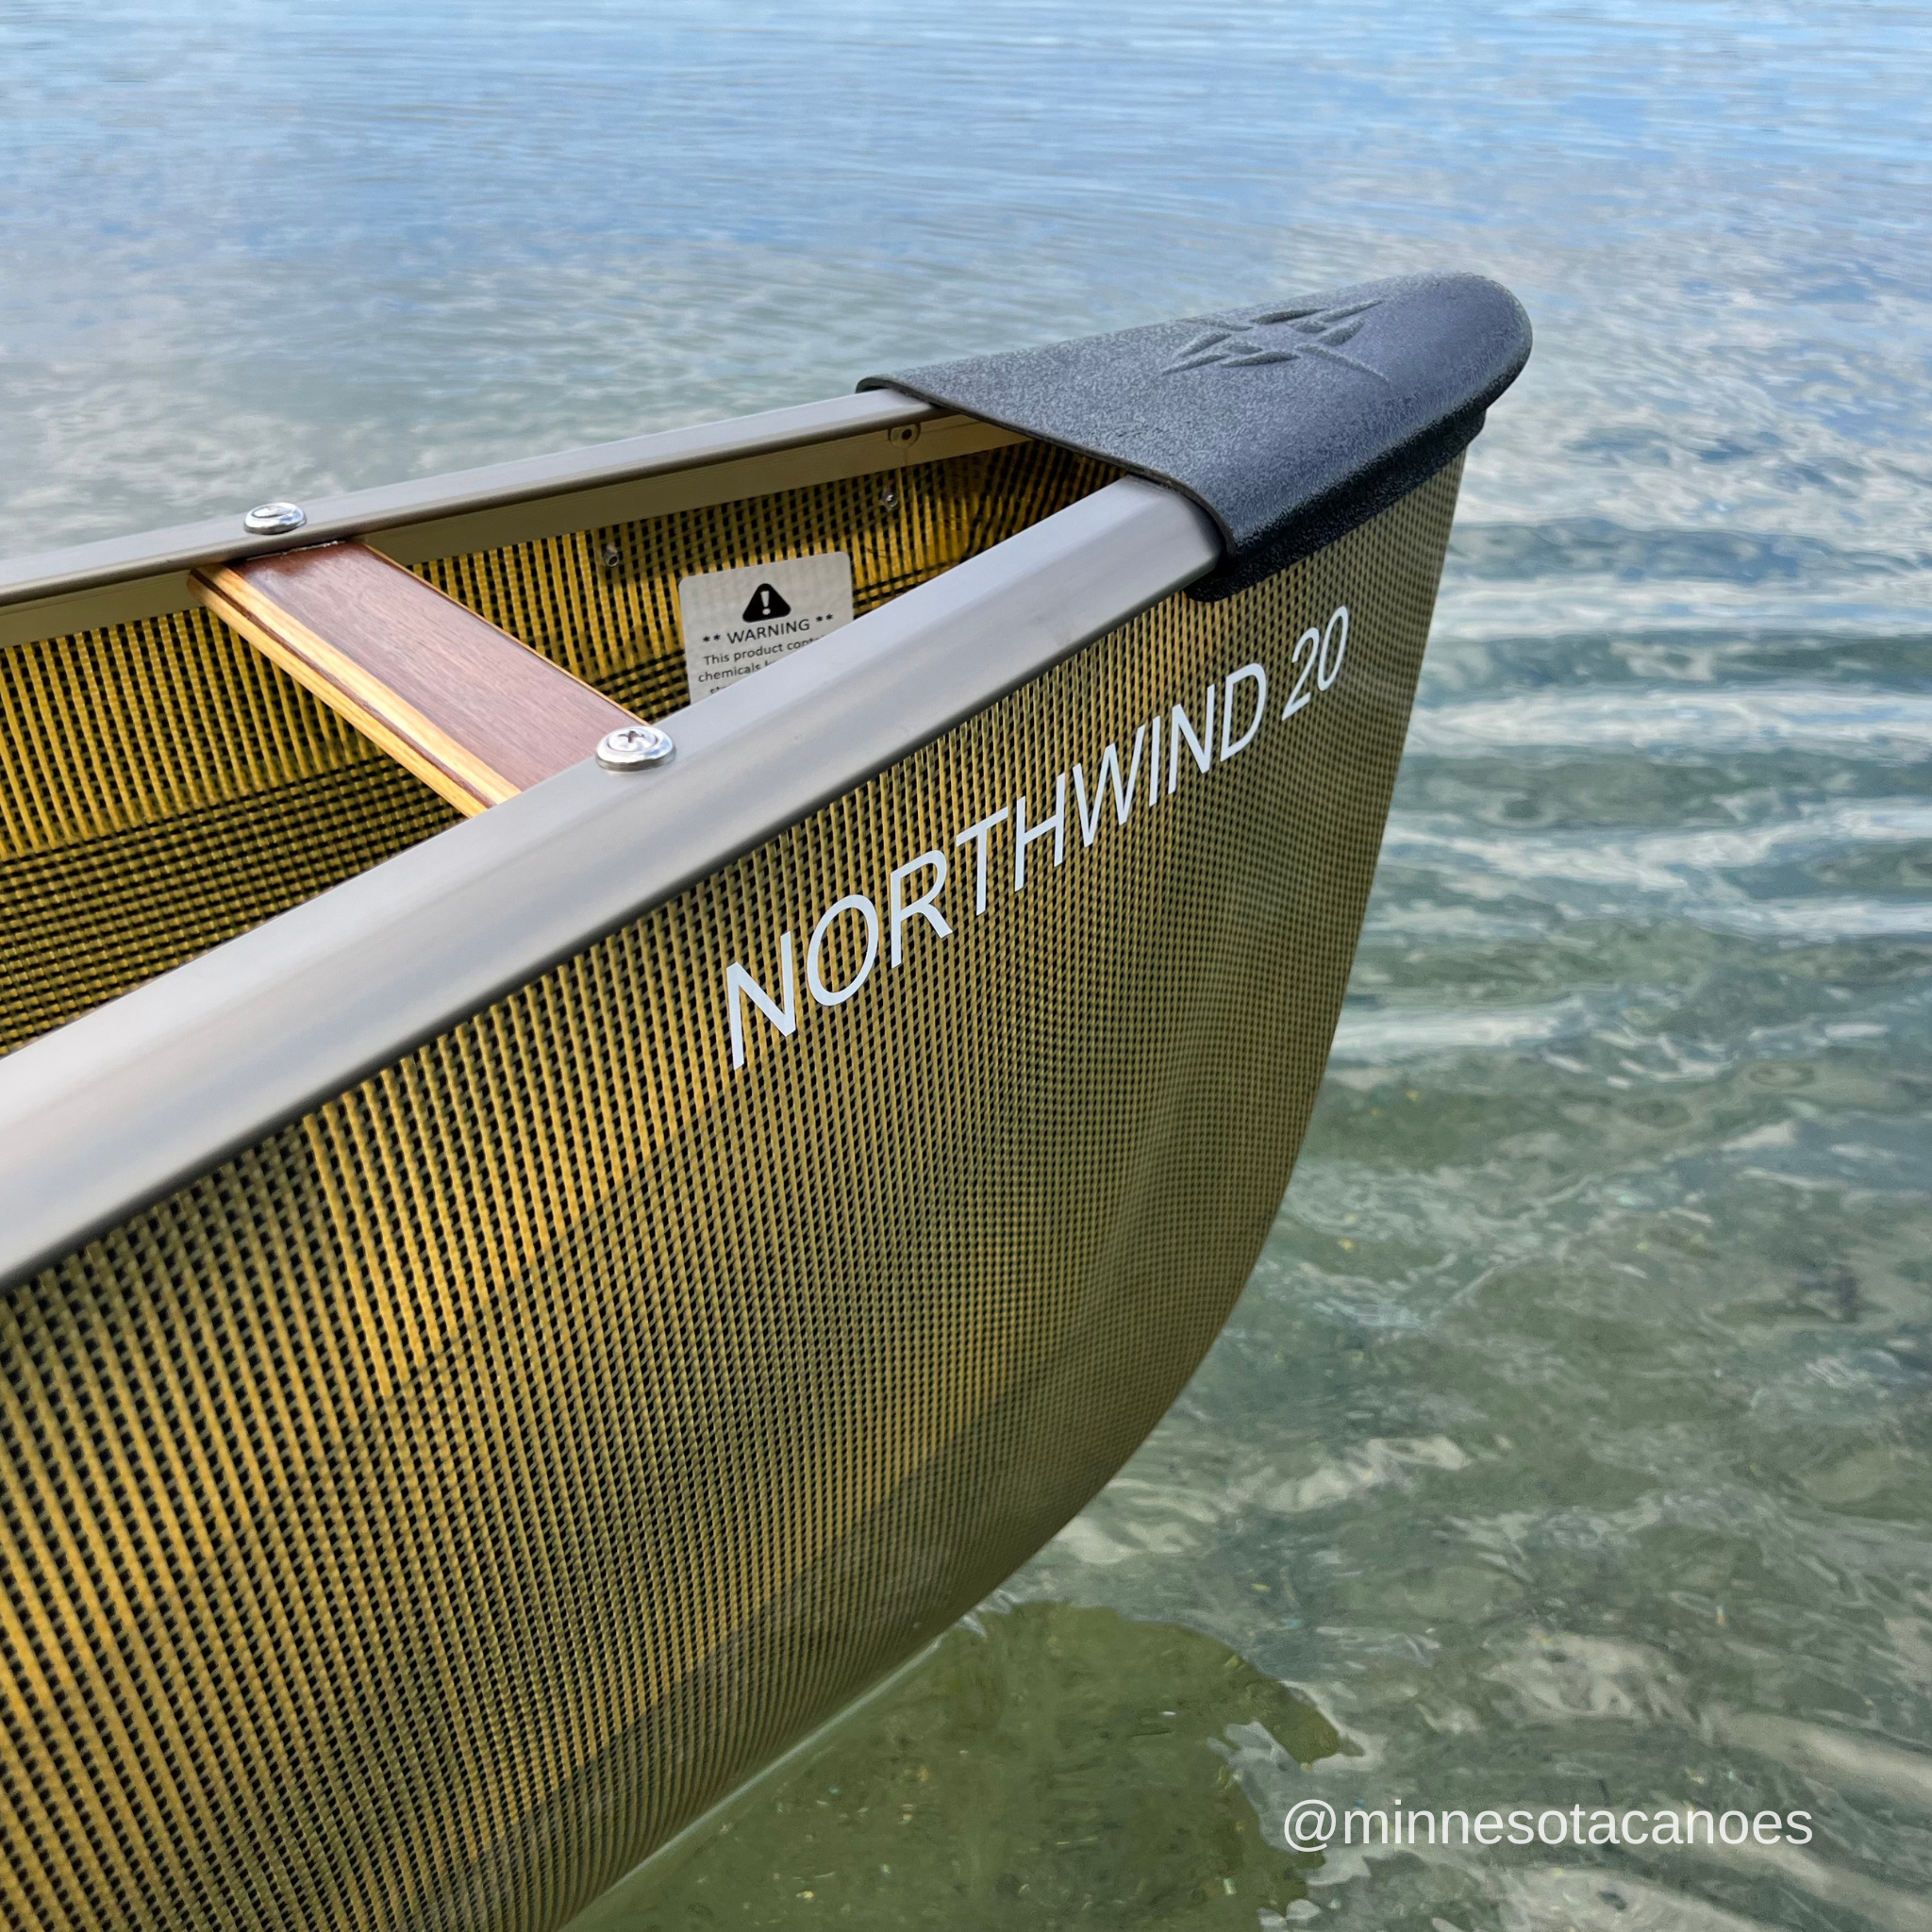 NORTHWIND 20 (20' 5") StarLite Upgraded Walnut Components Tandem Northstar Canoe with 4 Seats